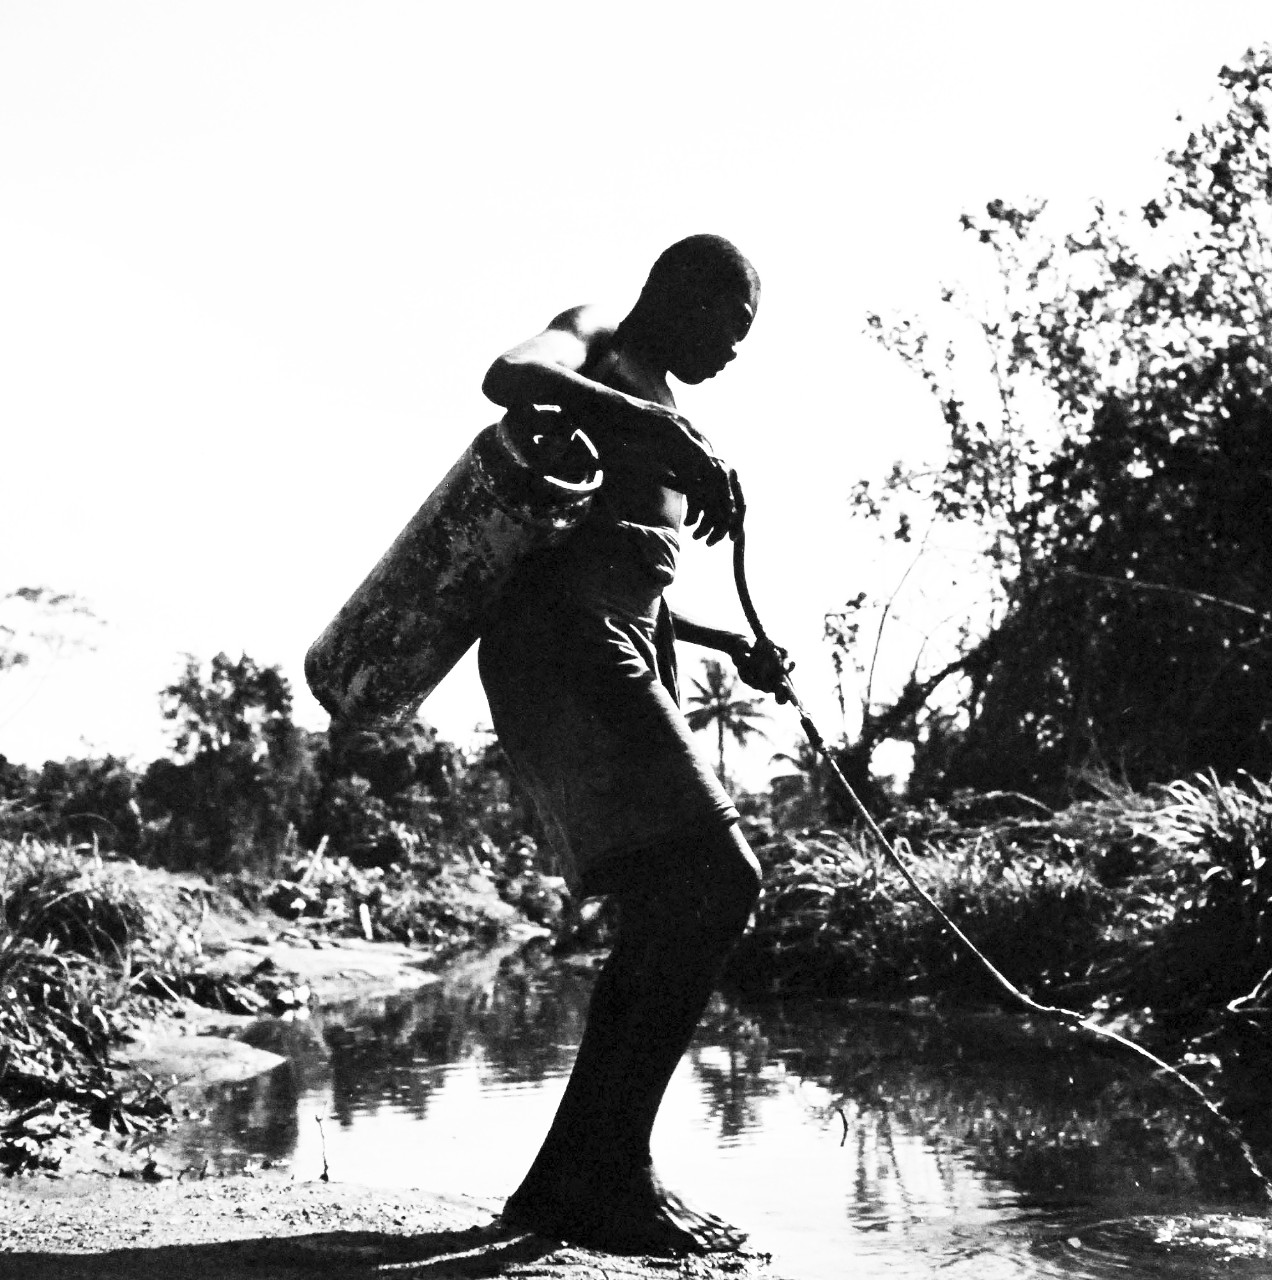 80-G-409049:  Bougainville Campaign, November 1943-August 1945.  Native working for the Malaria Control Unit on Bougainville sprays a ditch with a mixture that kills larvae of pestilent mosquitos.   Steichen Photograph crew, TR-9517, February 1944.   Official U.S Navy   Photograph, now in the collections of the National Archives.  (2017/12/13).